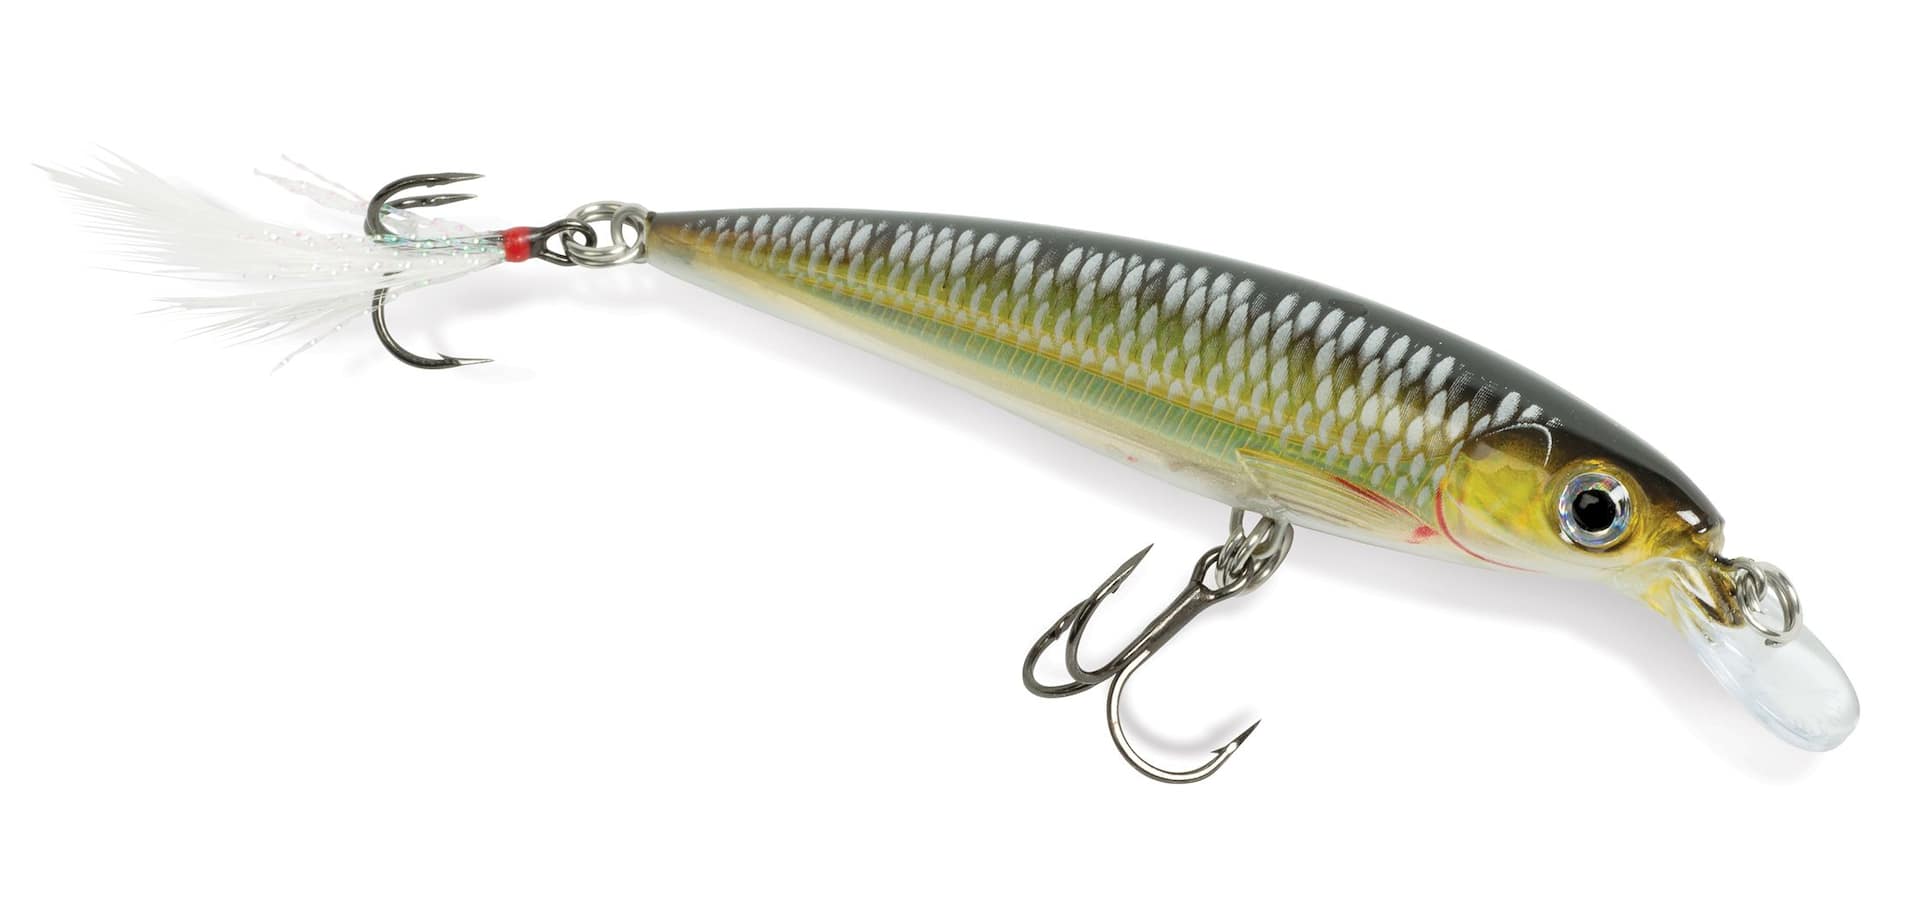 Holographic FRY Multi Jointed Fishing Lure